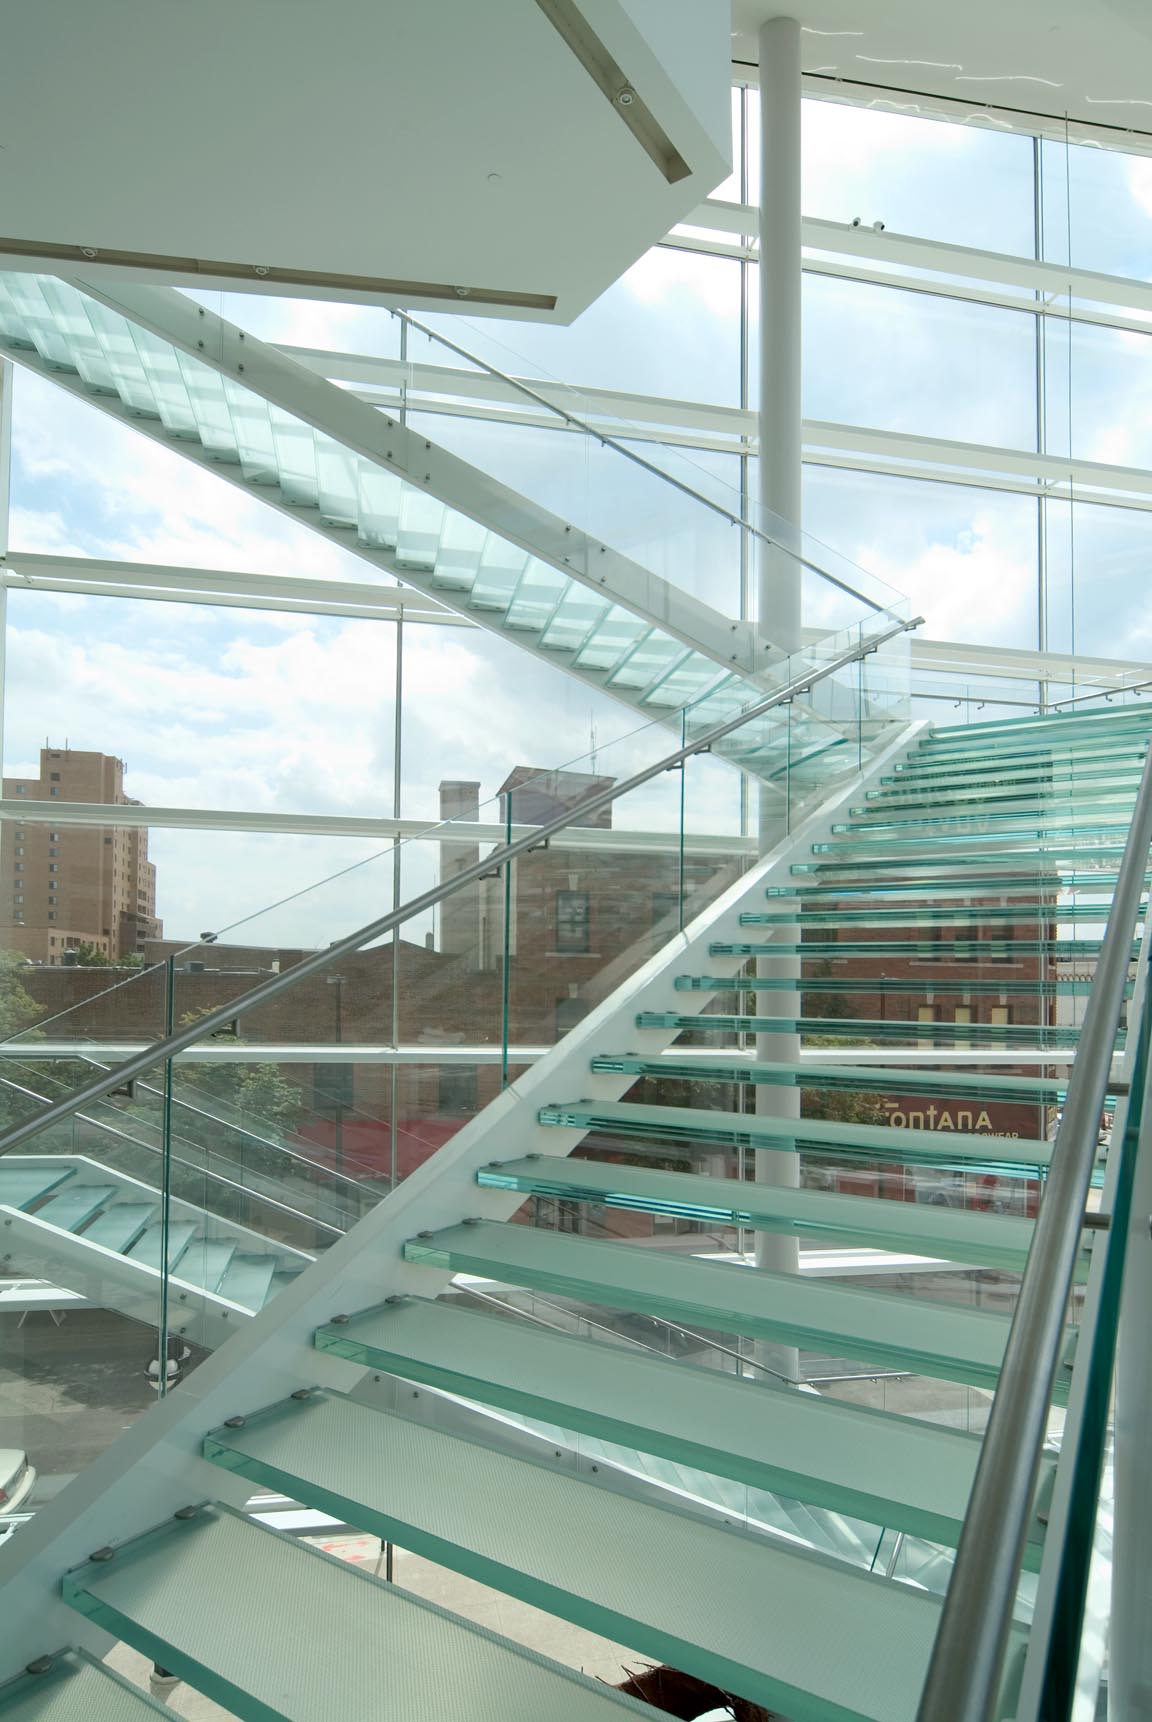 Overture Center for the Arts: Glass Stairway